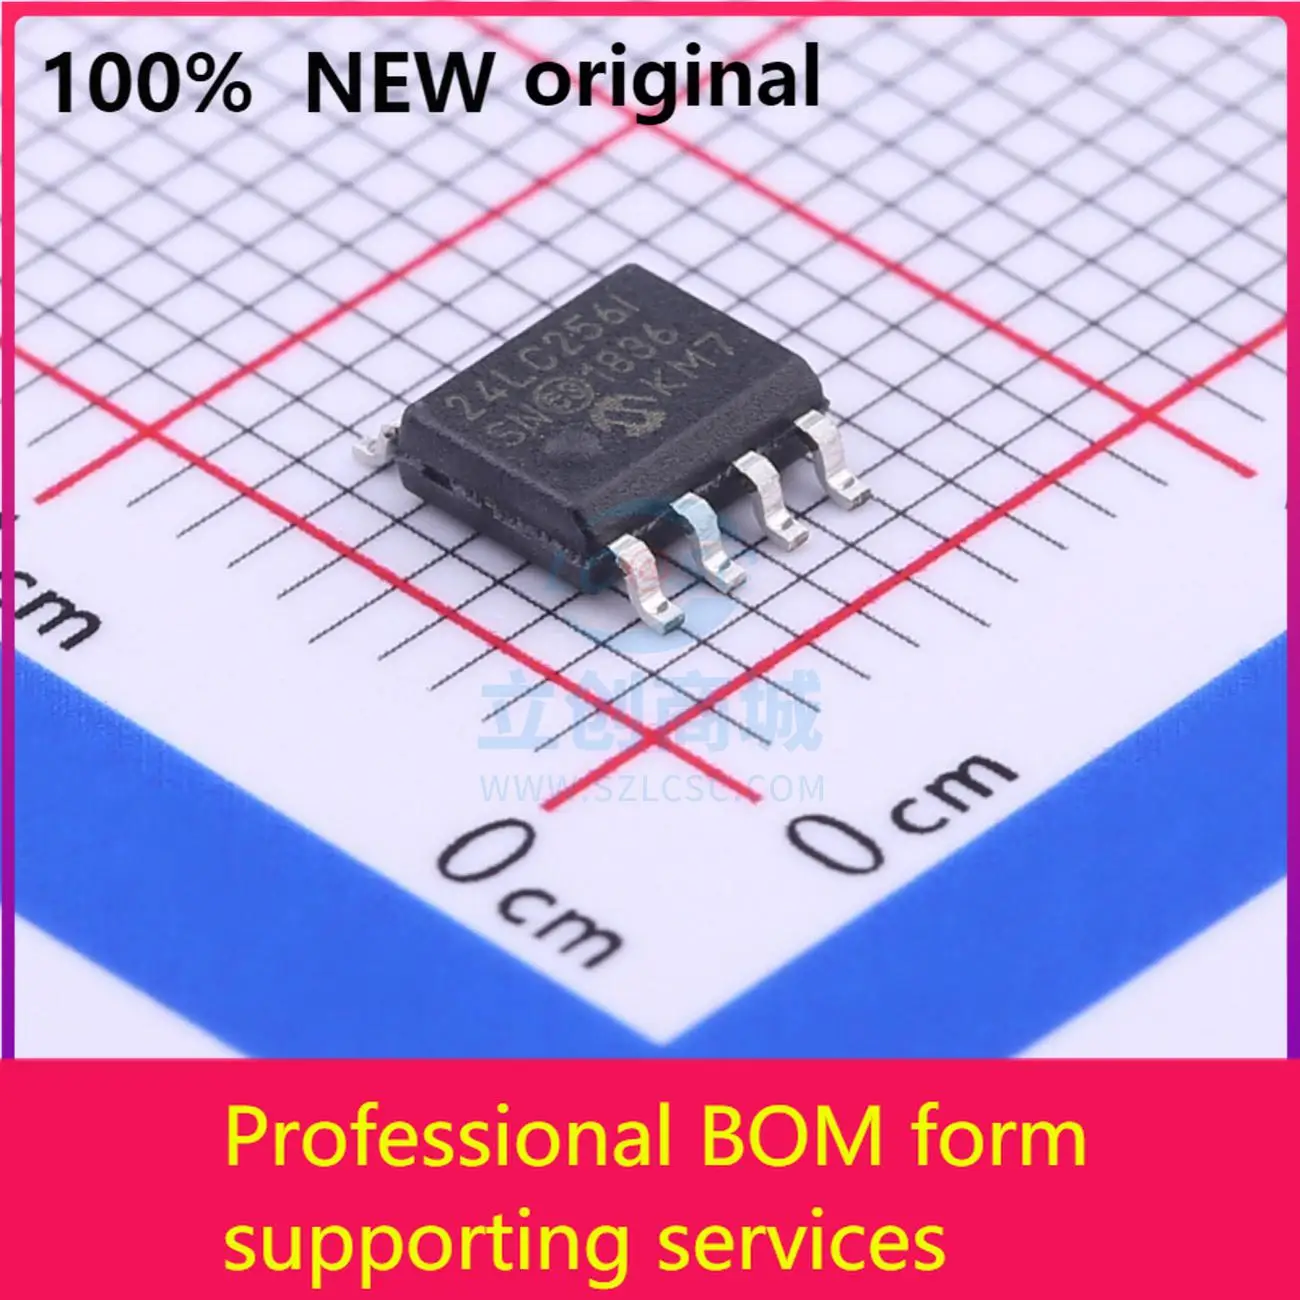 

EEPROM 24LC256-I/SN 24LC256-I/SNNew Оригинальный оригинальный чип IC 100% оригинал